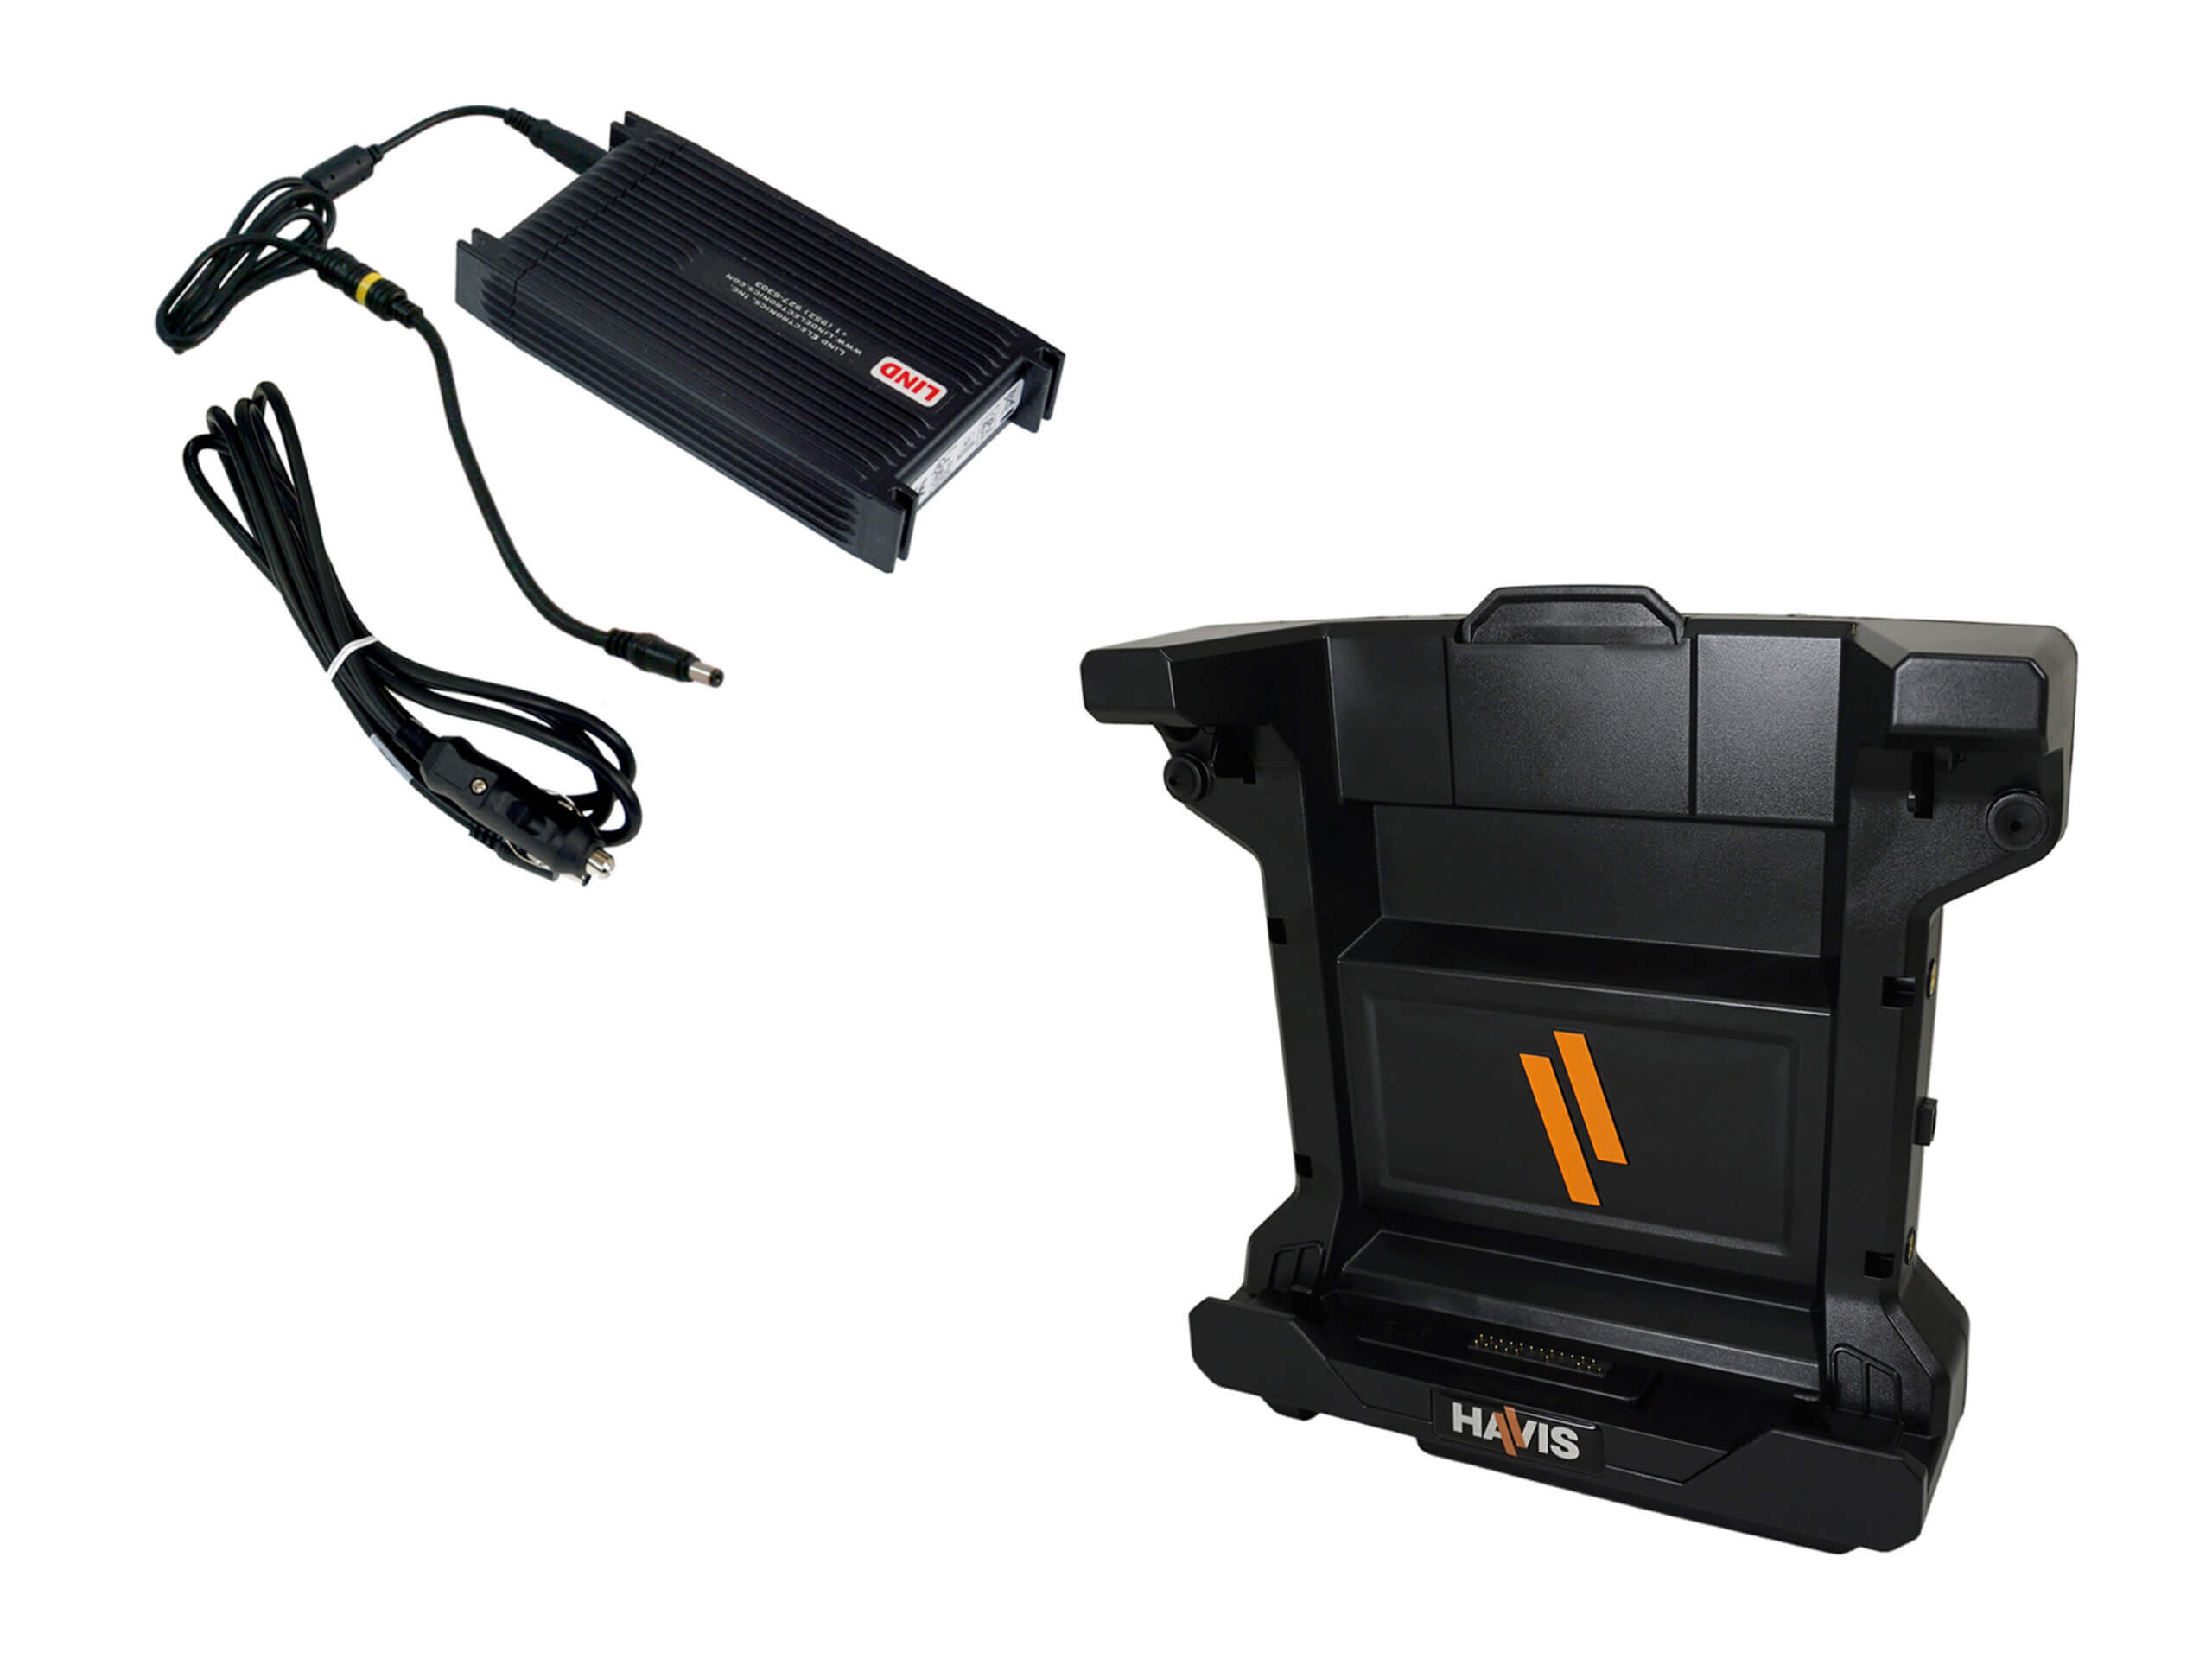 Docking Station with Advanced Electronics, Dual Pass-Thru Antenna Connections, and External Power Supply for Dell Latitude Rugged 12″ Tablets (7220 , 7212)